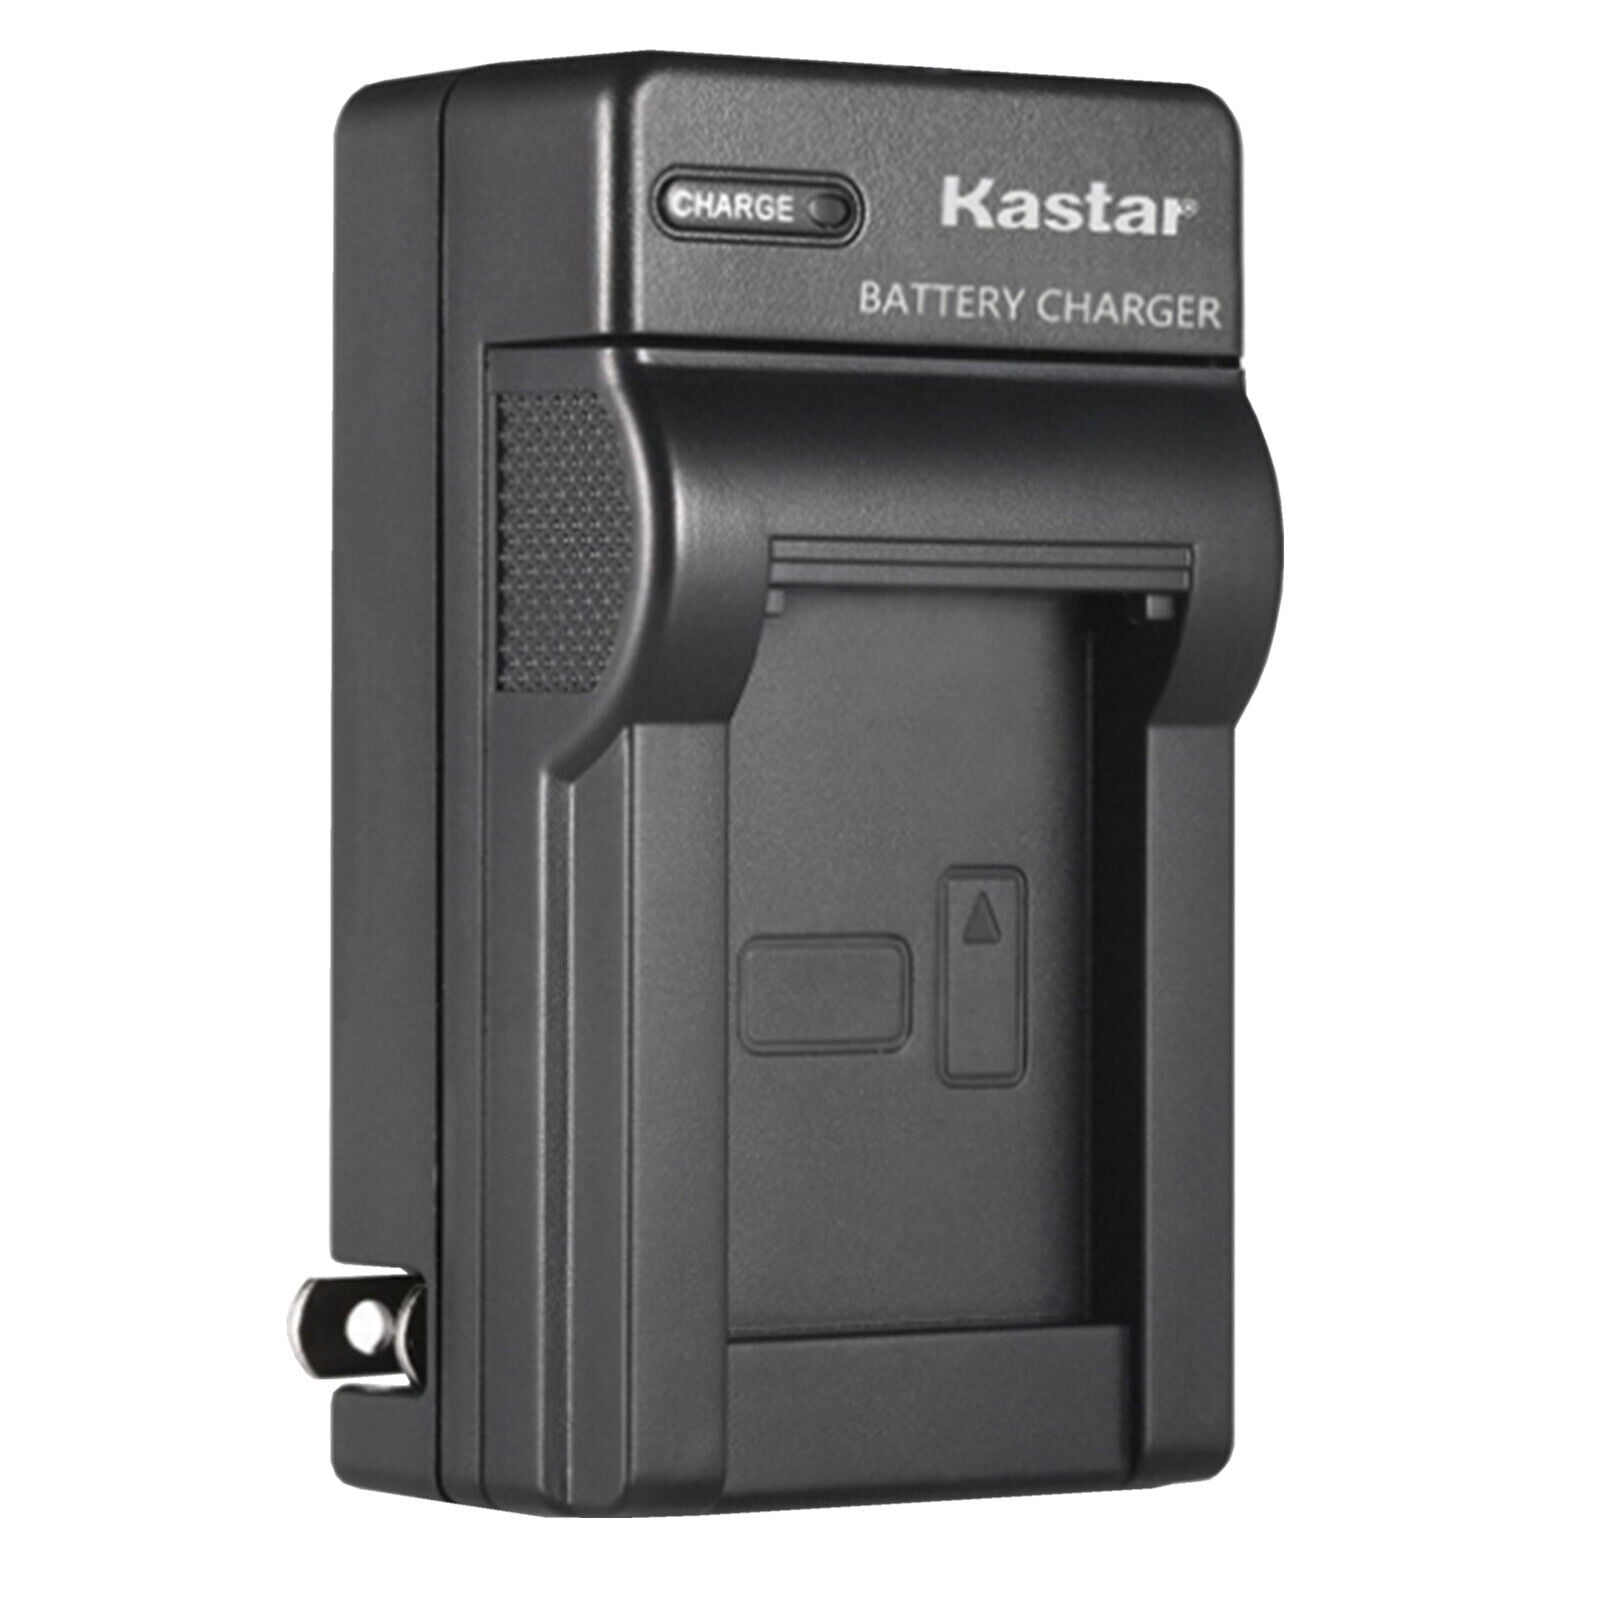 Kastar NP-F750 / AC Wall Battery Charger Replacement for FEELWORLD LUT7 PRO INCH 2200NITS DSLR CAMERA FIELD MONITOR, LUT7S PRO 7 INCH 2200NITS CAMERA FIELD MONITOR - Walmart.com